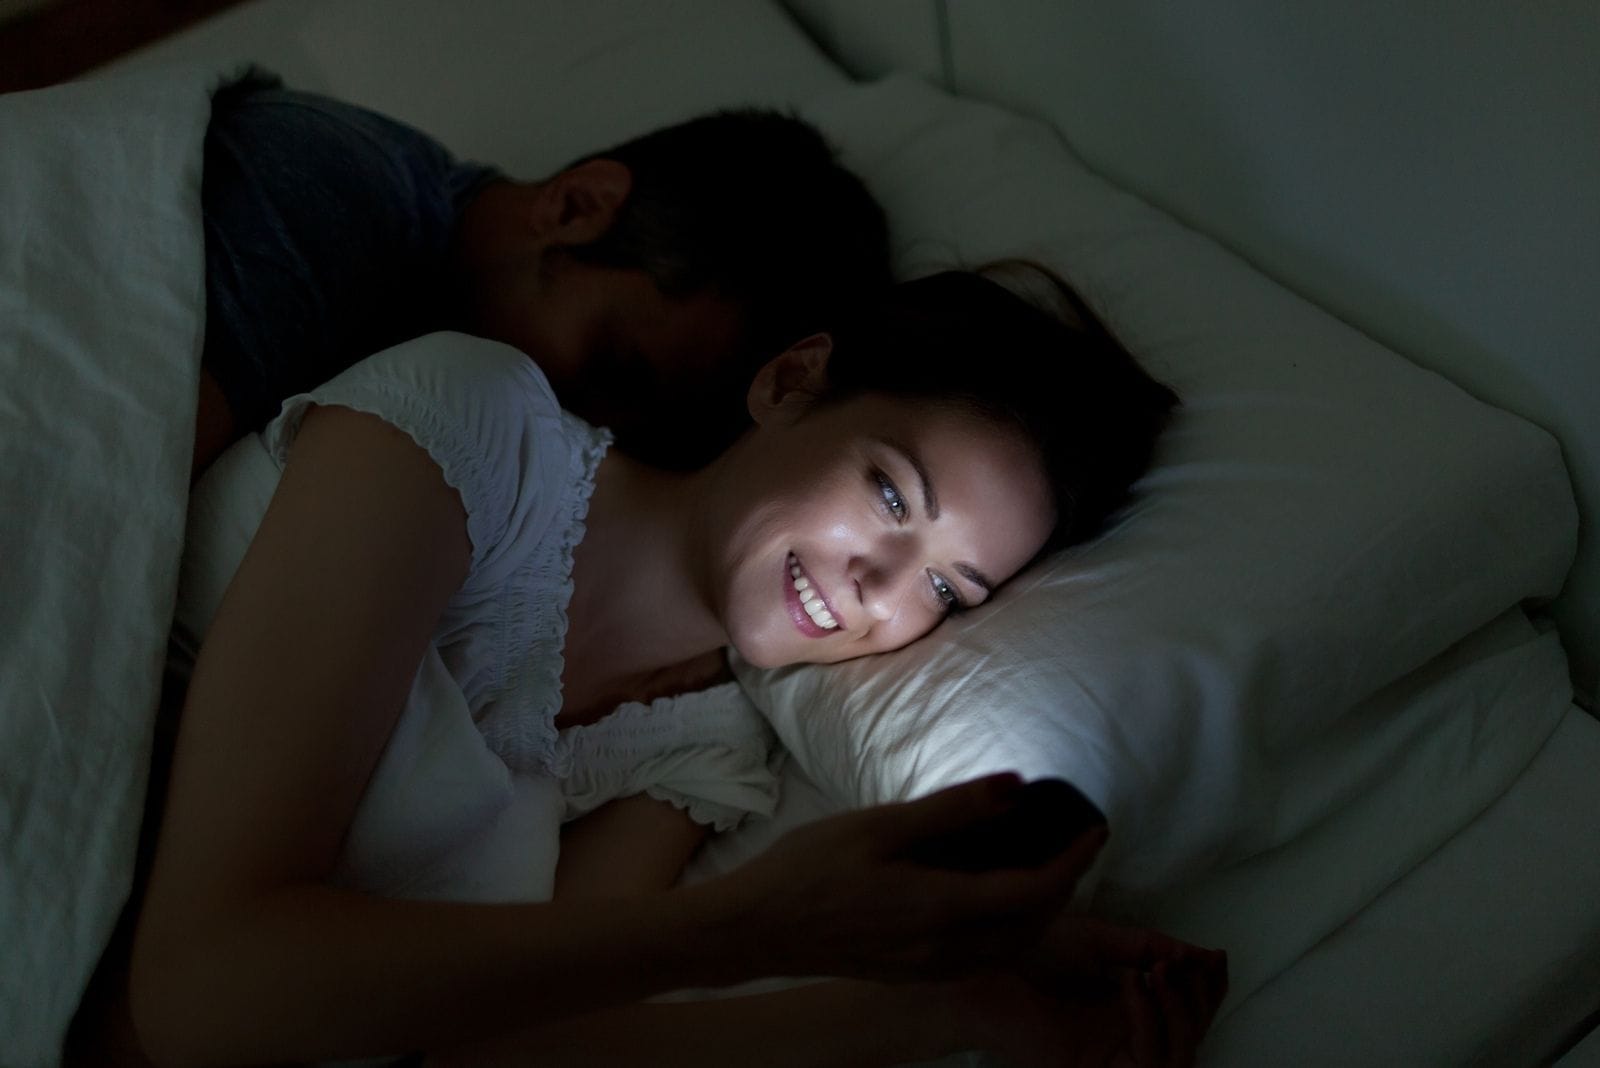 woman smiling and texting on mobile phone while lying down beside her sleeping husband